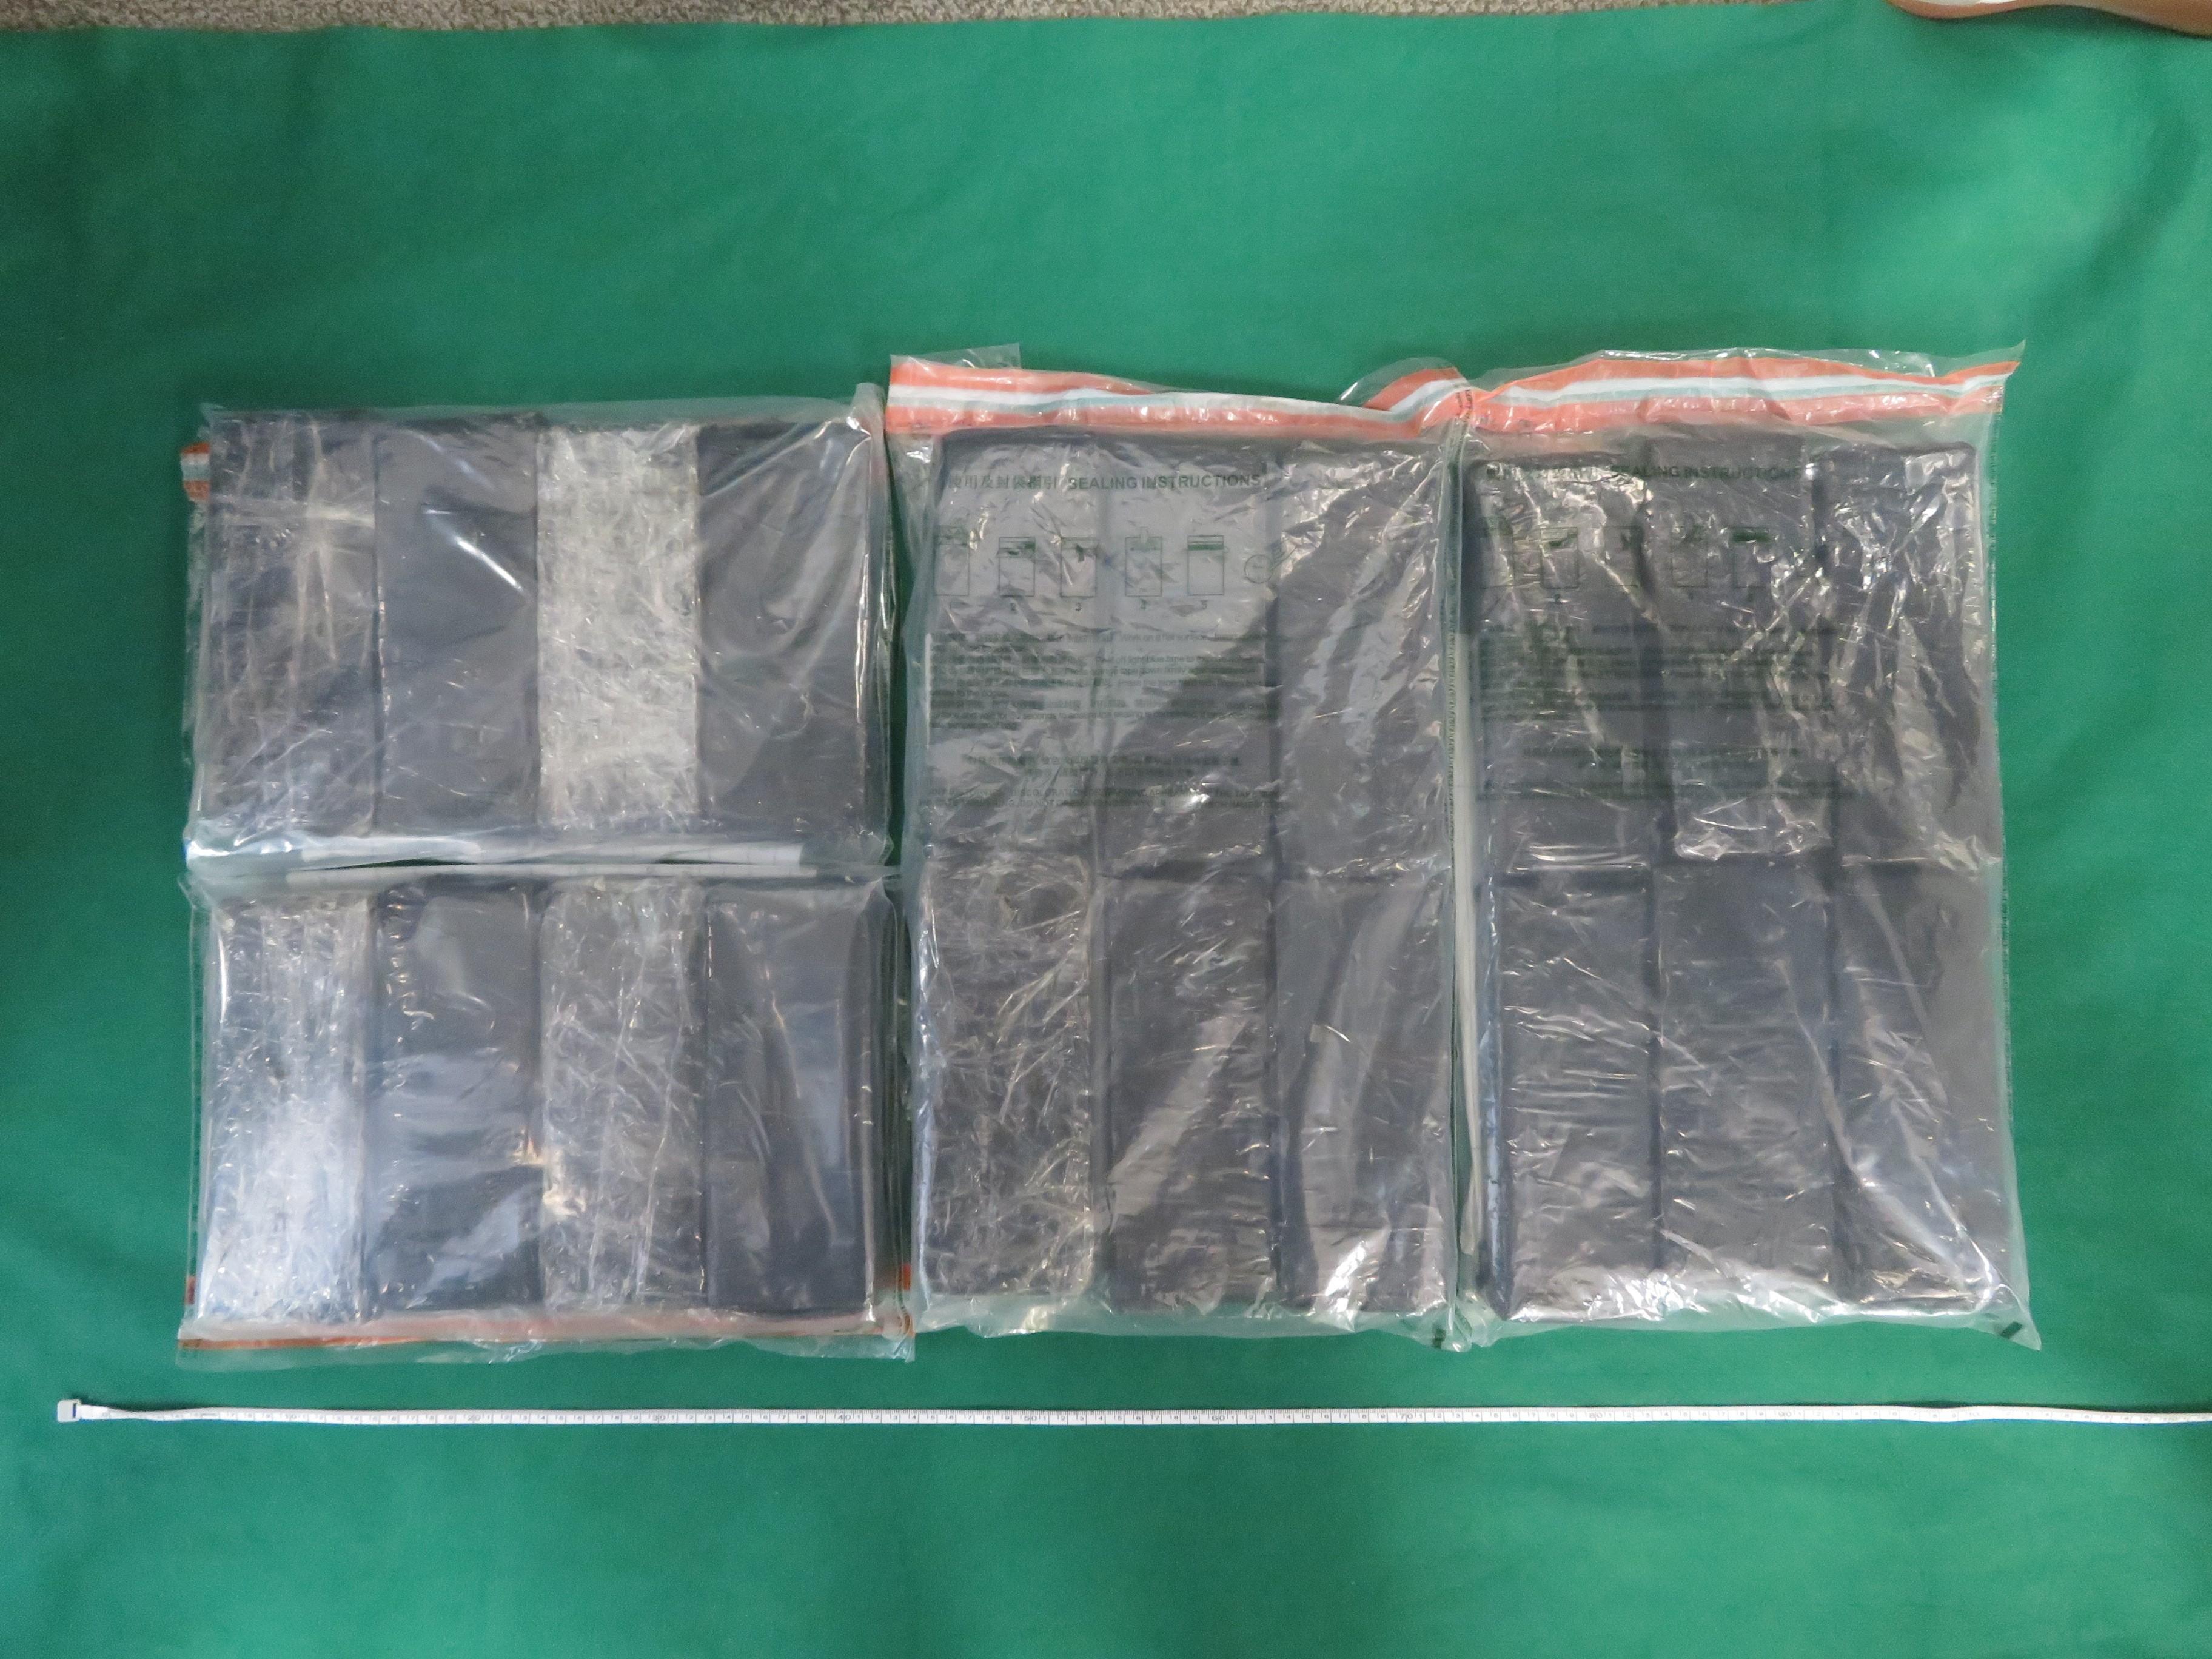 ​Hong Kong Customs conducted anti-narcotics operations on August 18 and October 5 and detected two dangerous drugs trafficking cases. About 86 kilograms of suspected cannabis buds and a small quantity of suspected cocaine and suspected ketamine, with a total estimated market value of about $20.4 million, were seized. Photo shows the suspected cannabis buds seized on August 18.